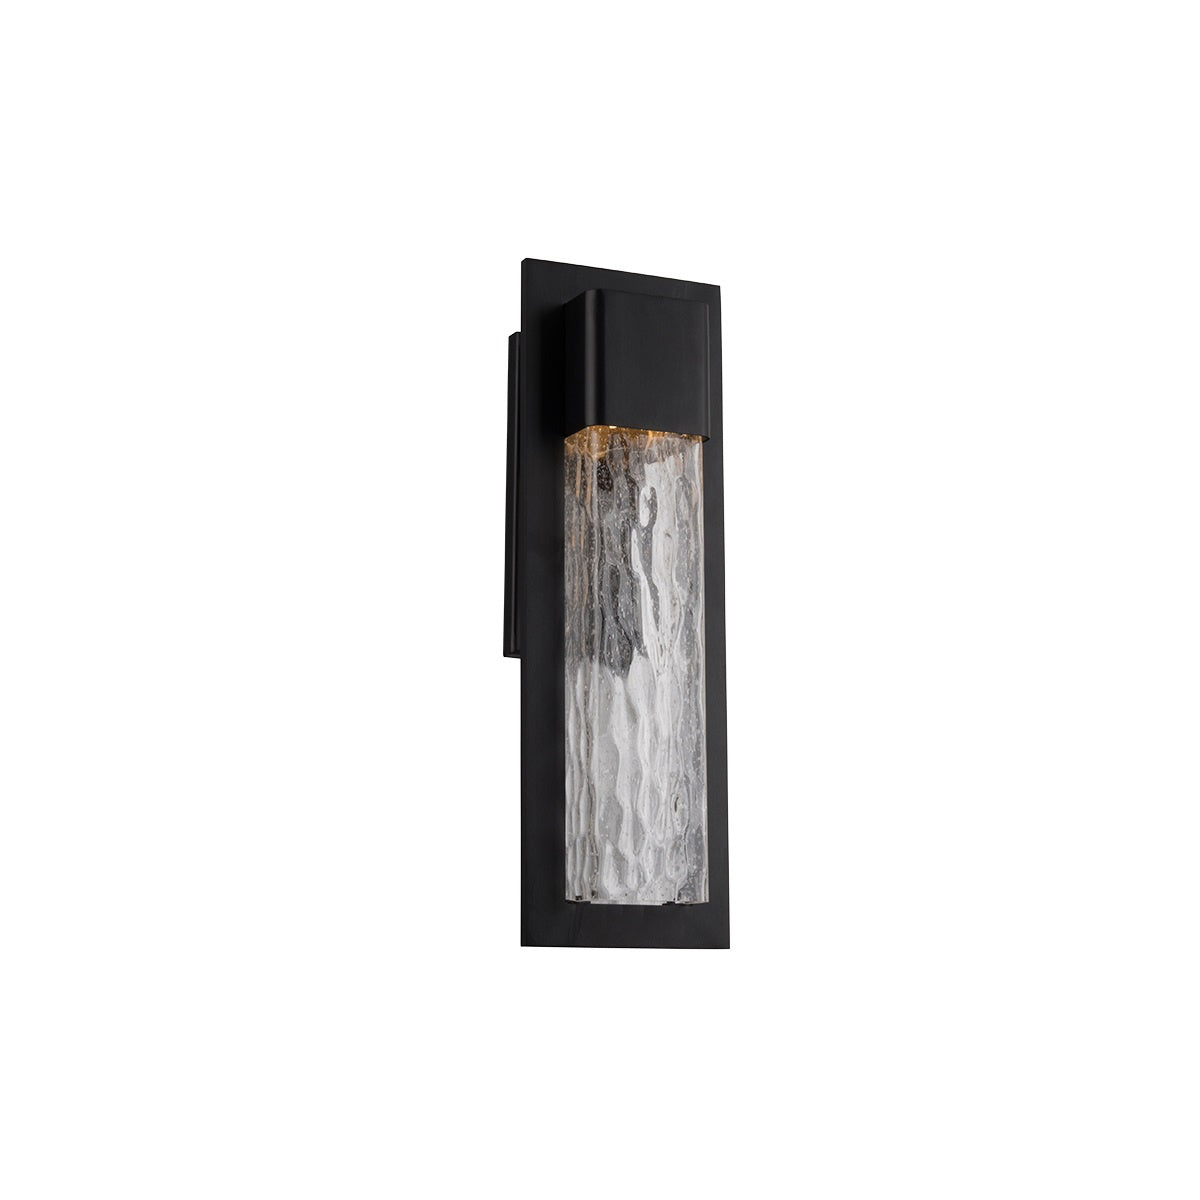 Modern Forms - WS-W54020-BK - LED Outdoor Wall Sconce - Mist - Black